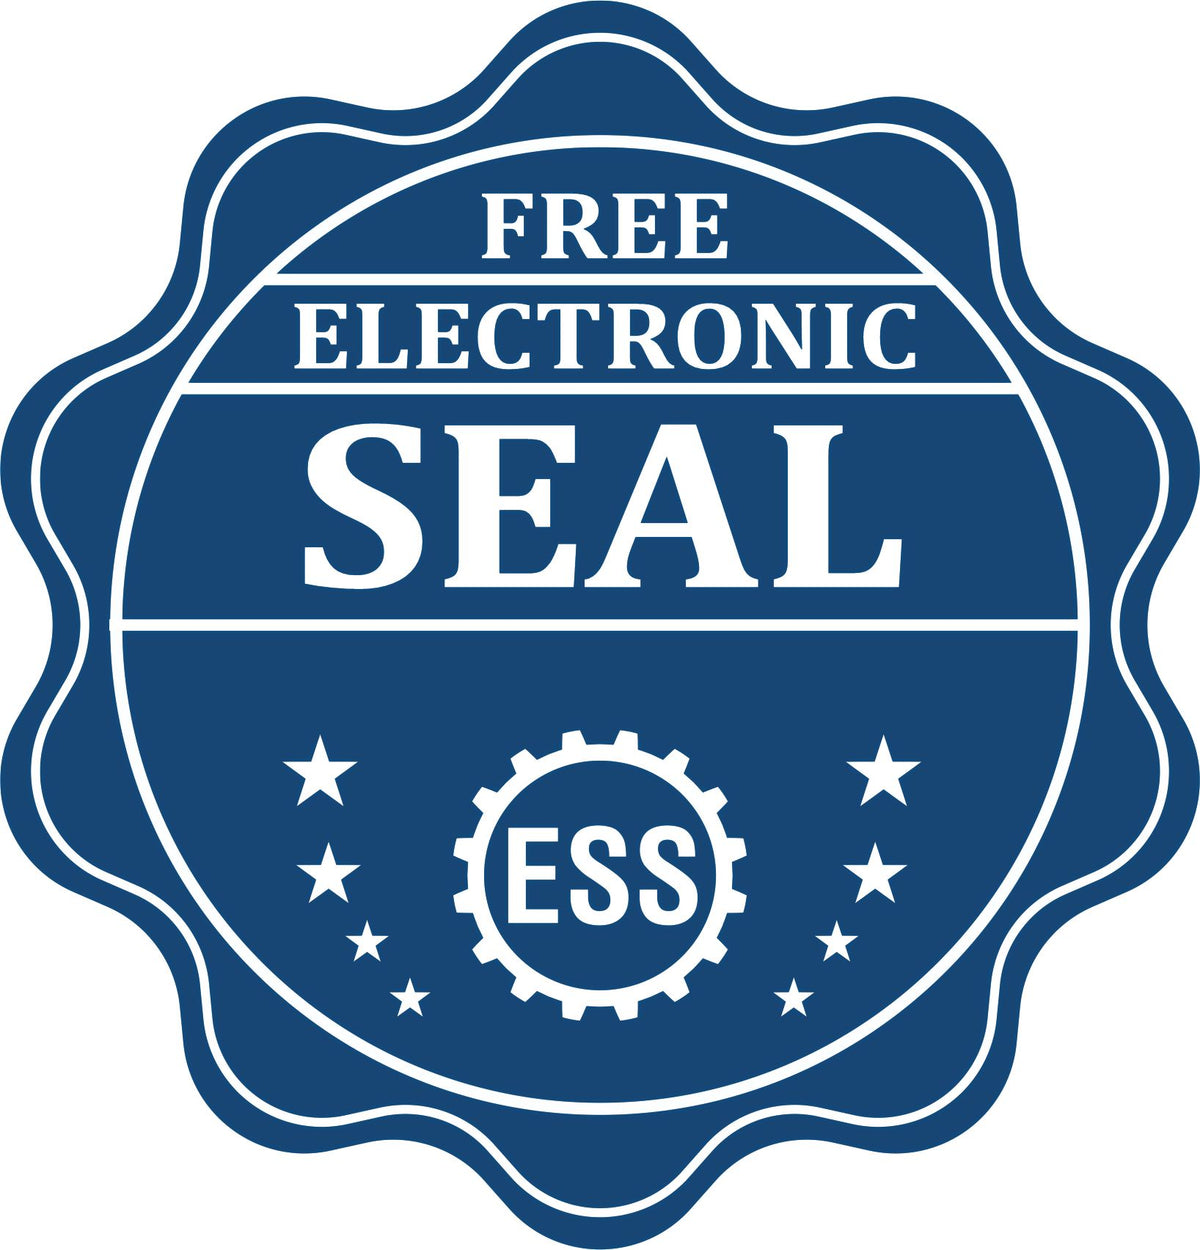 A badge showing a free electronic seal for the Heavy Duty Cast Iron Virginia Architect Embosser with stars and the ESS gear on the emblem.